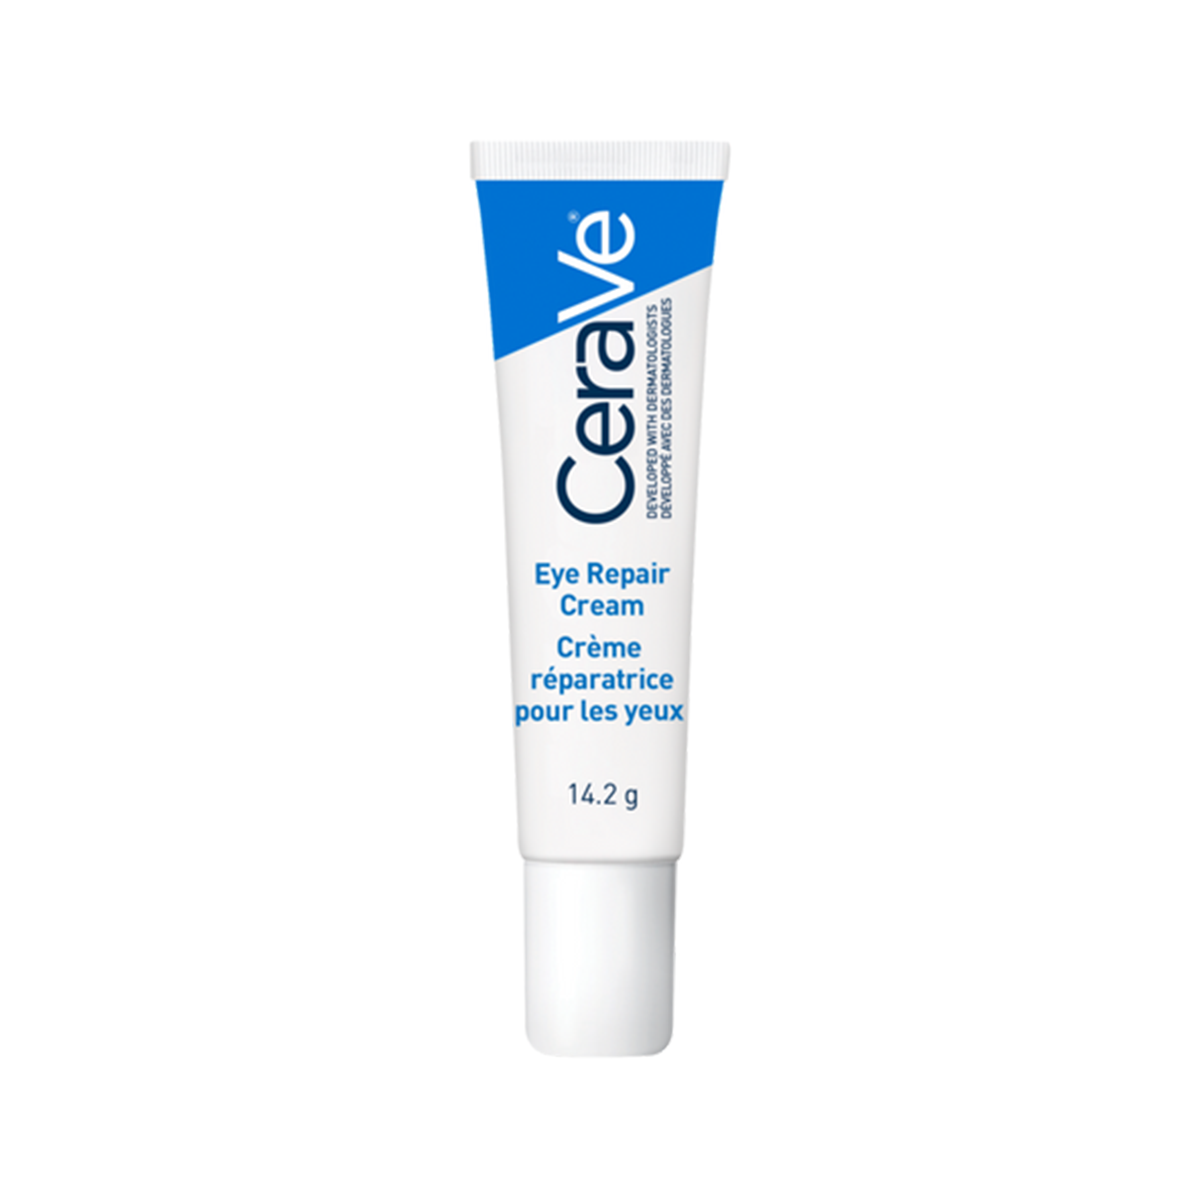 First product image of CeraVe Eye Repair Cream 14.2g